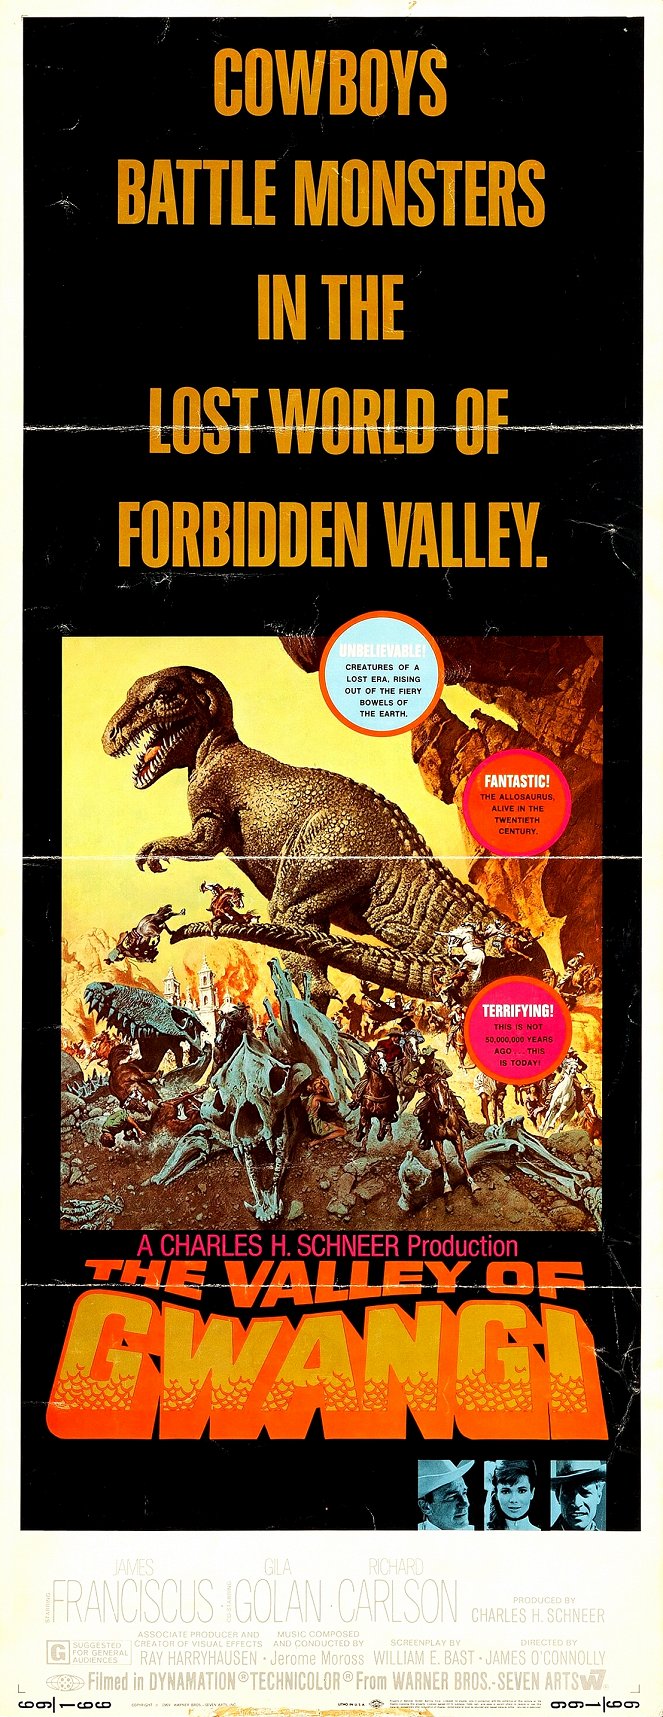 The Valley of Gwangi - Posters